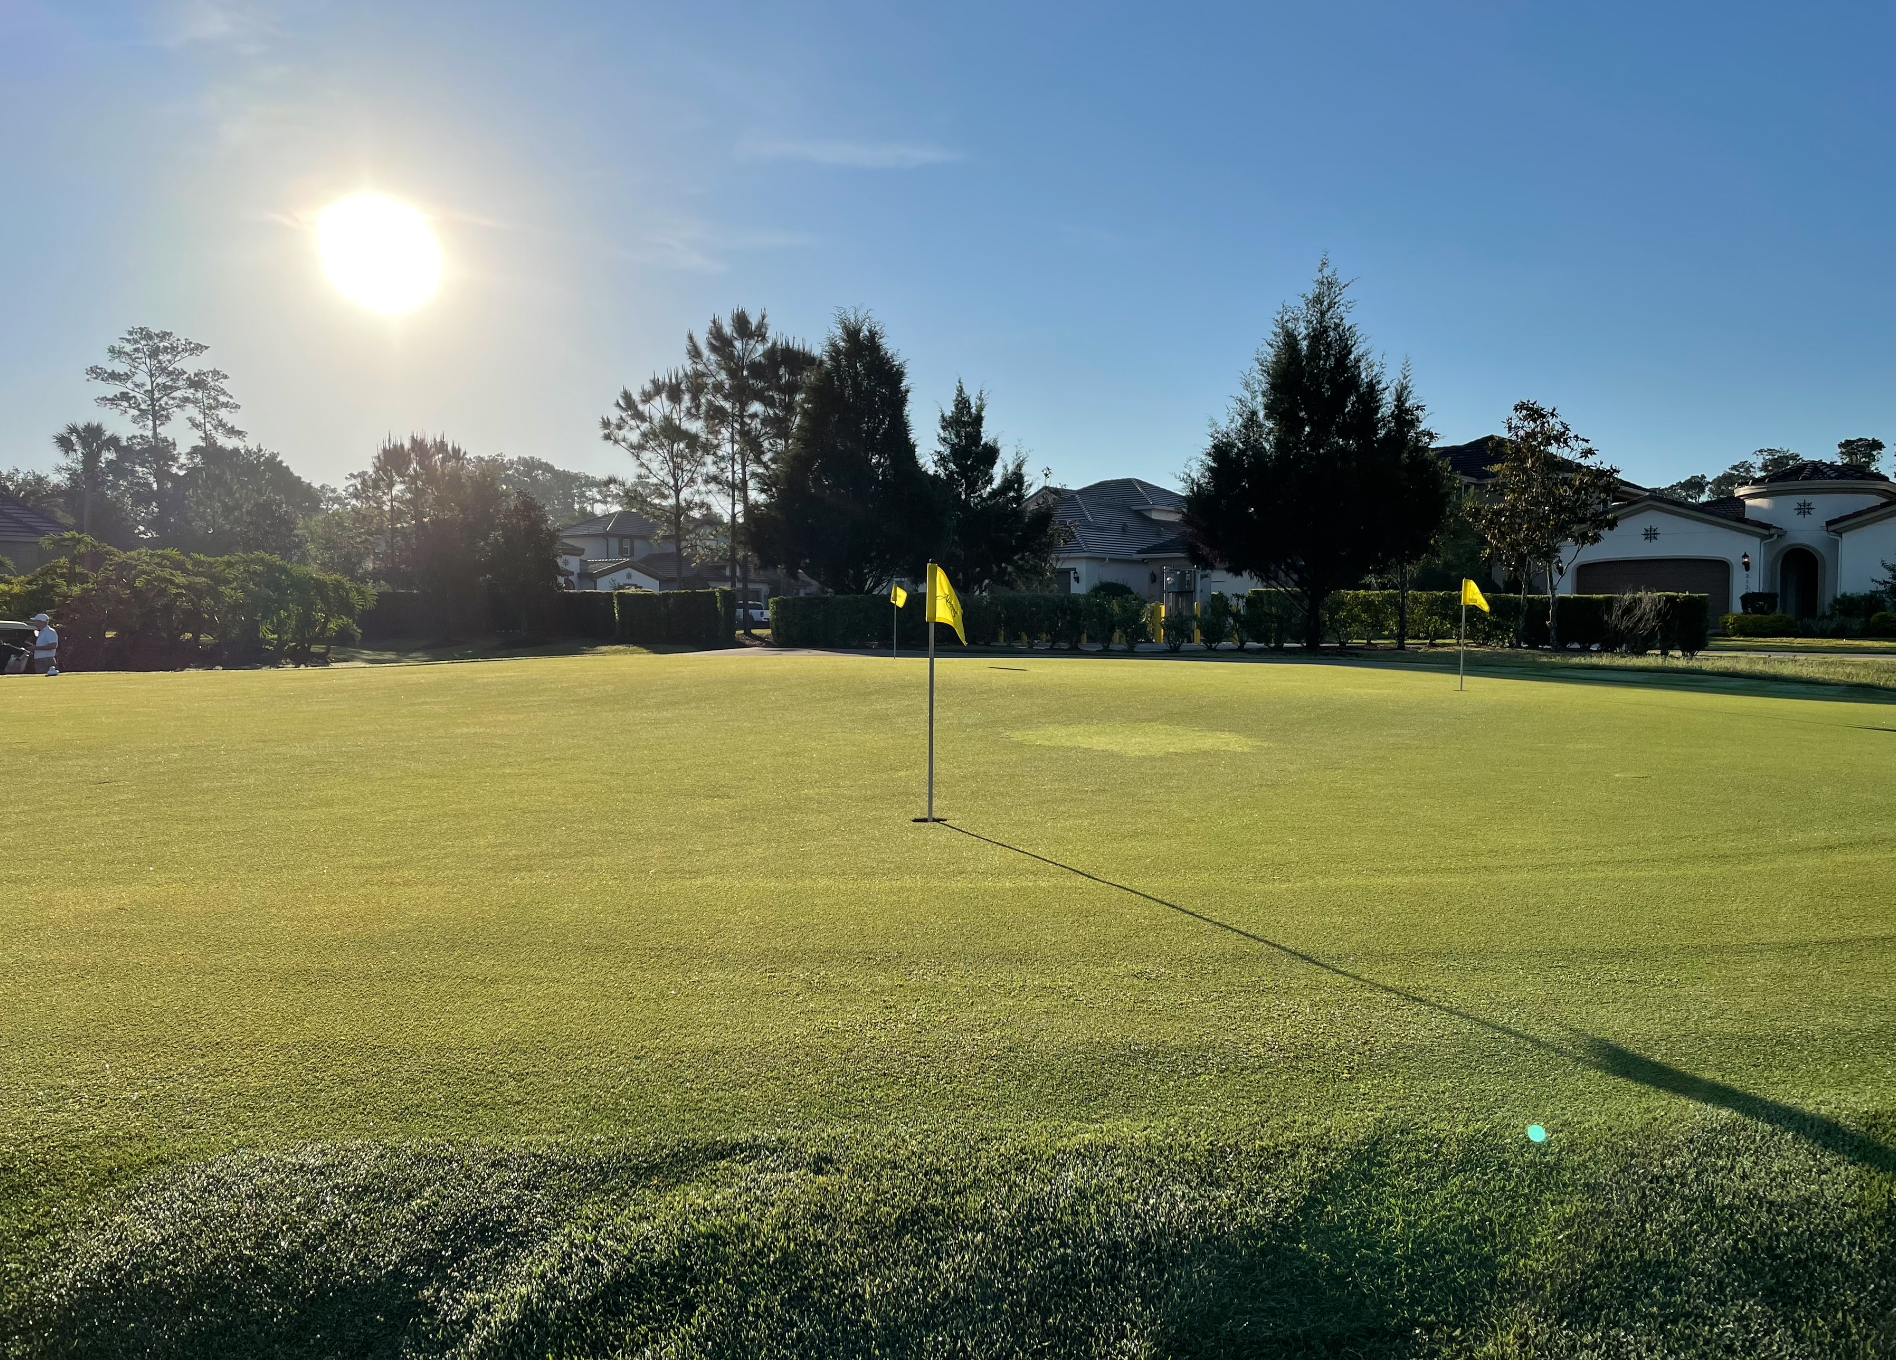 Read the Putting Green Like a Pro